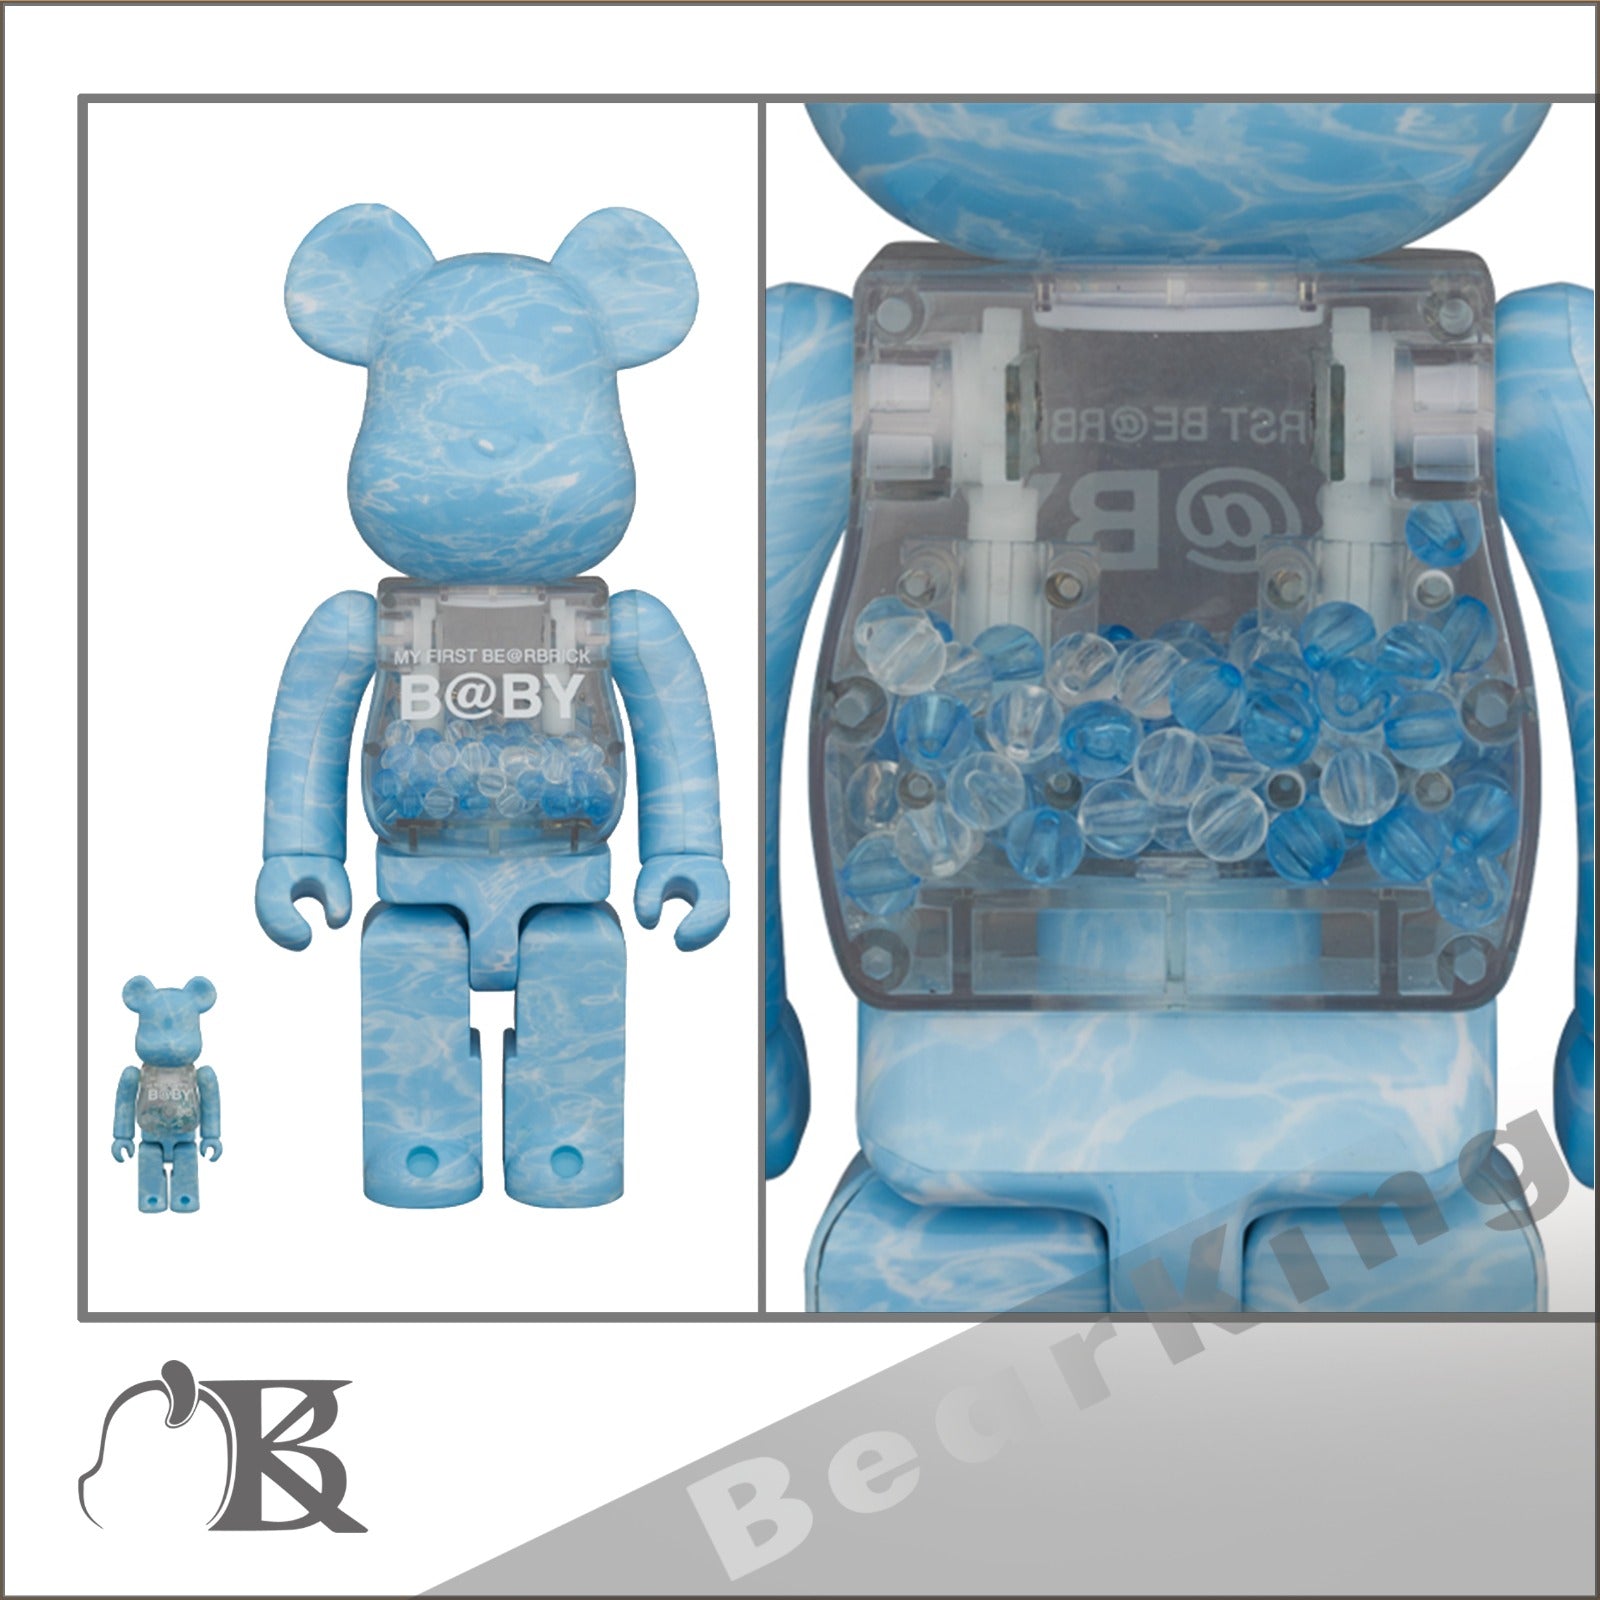 MY FIRST BE@RBRICK B@BY AUTUMN LEAVES Ver. 100％ & 400％ 千秋baby 楓葉